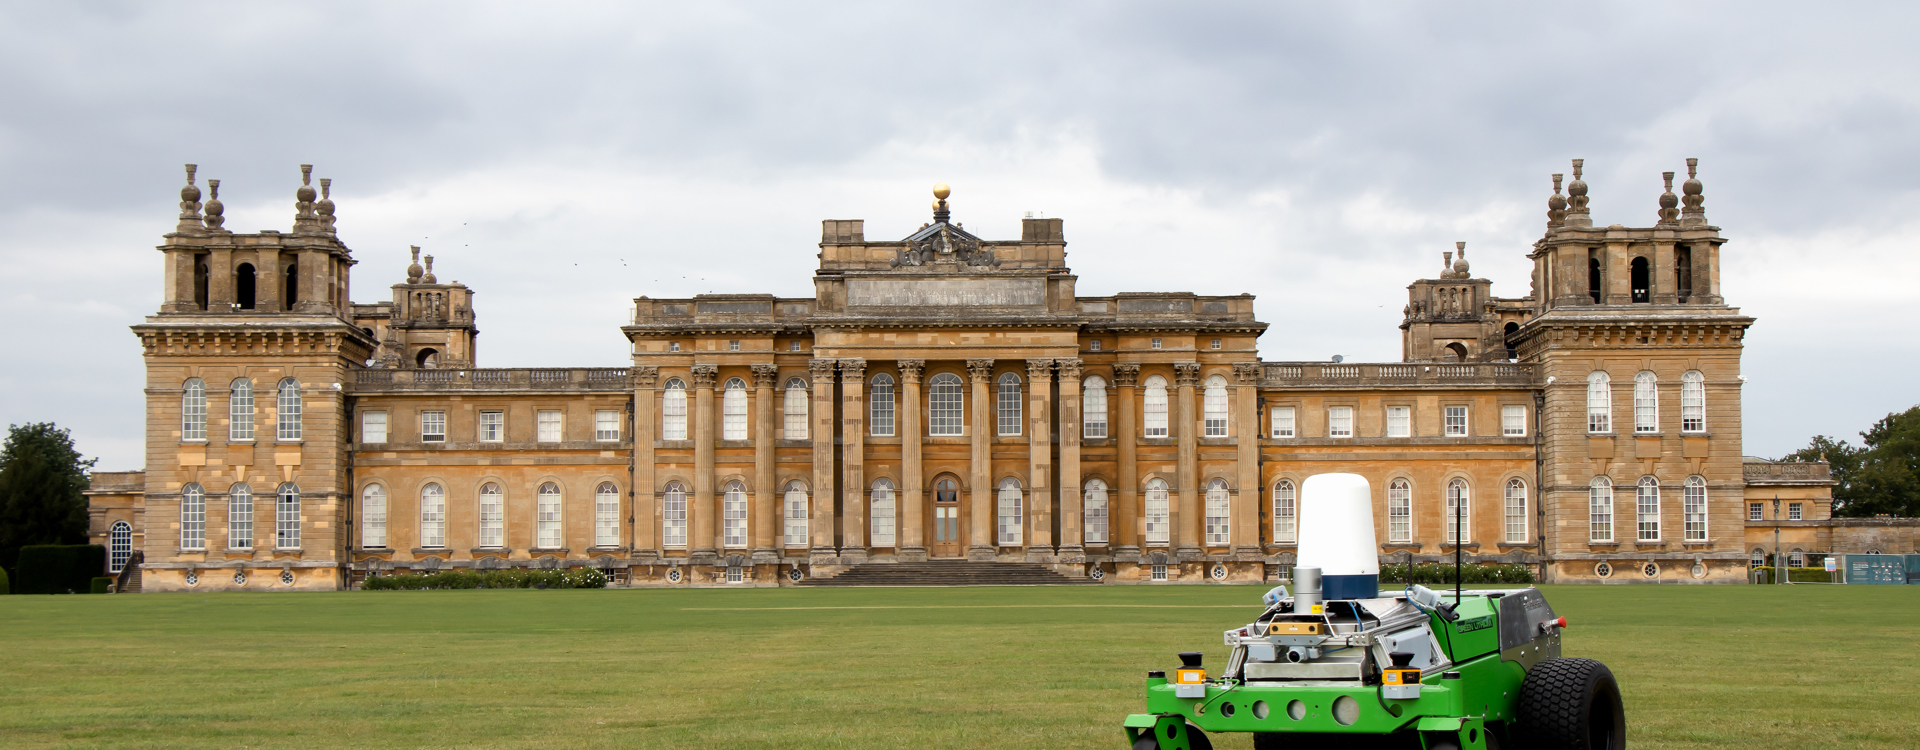 Hulk robot in front of Blenheim Palace. 